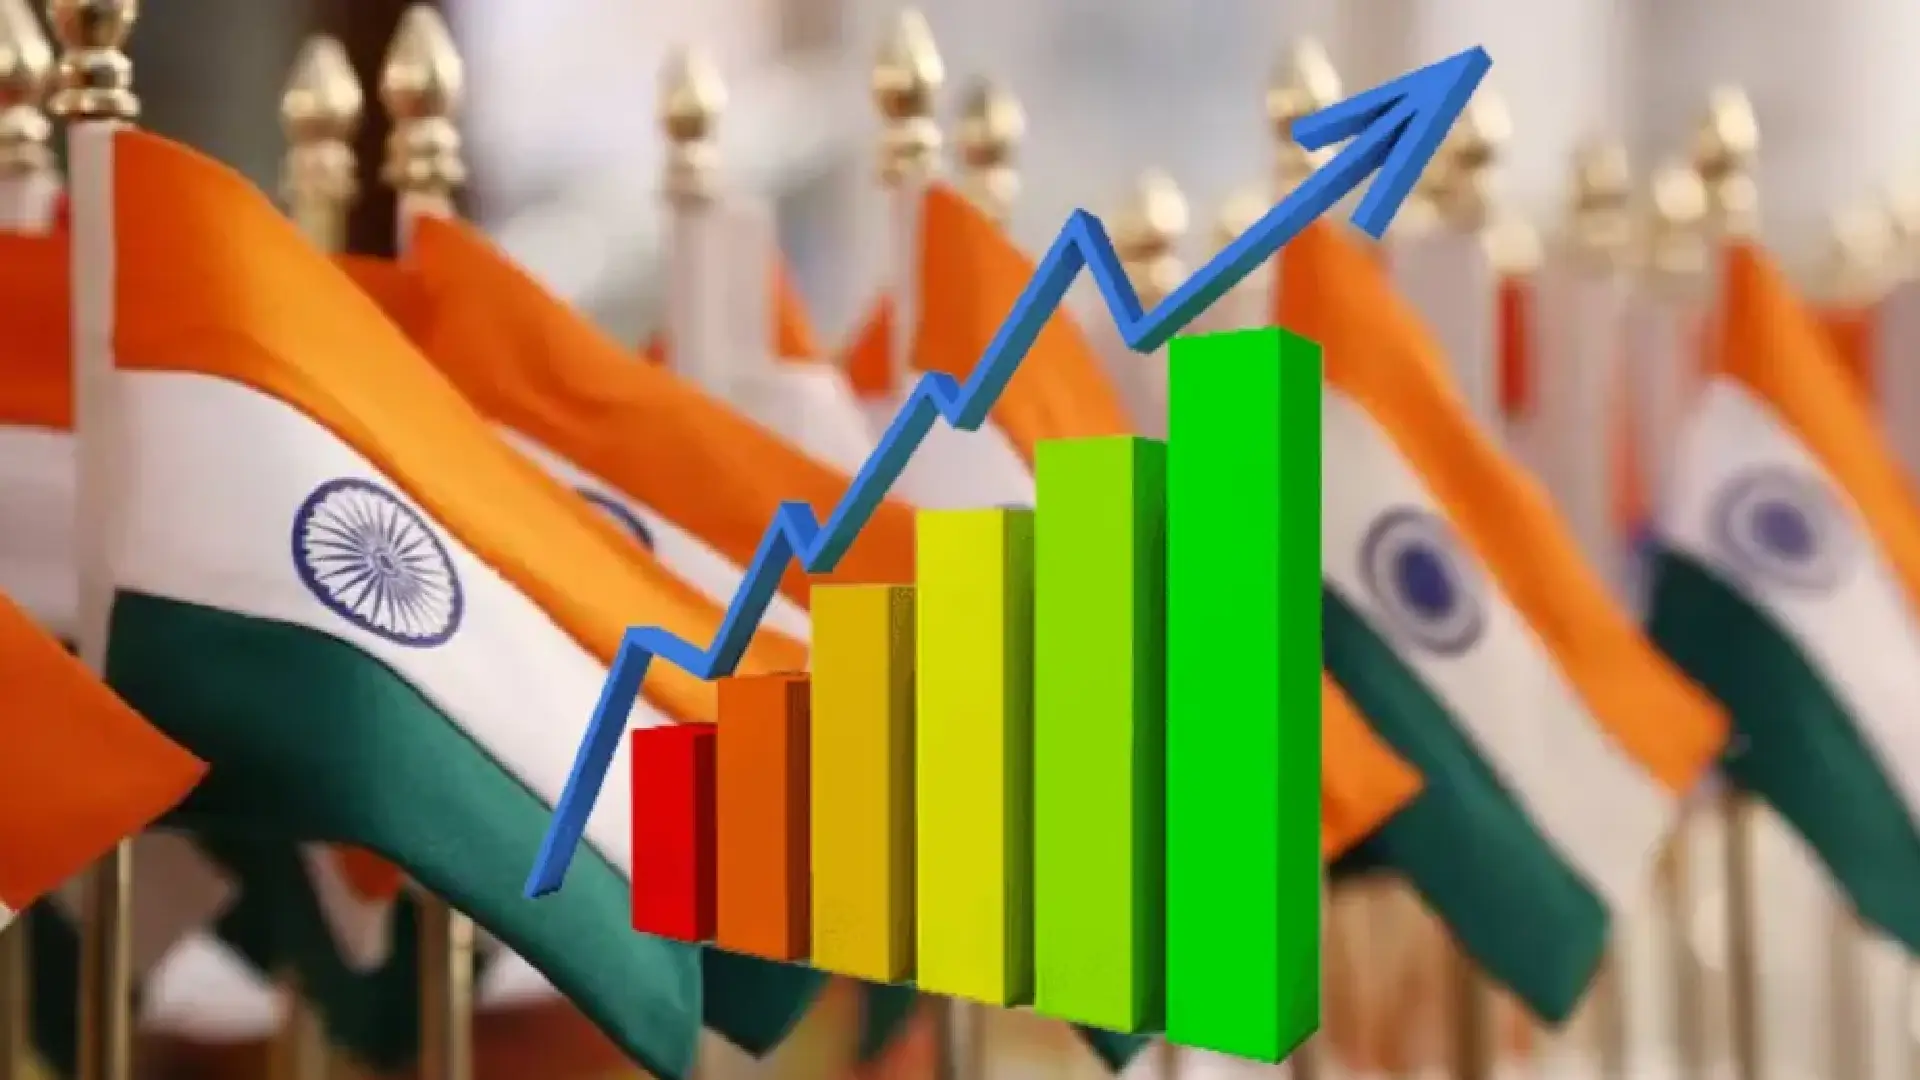 "India's Economic Ascent: A Vision for Global Growth 🚀"